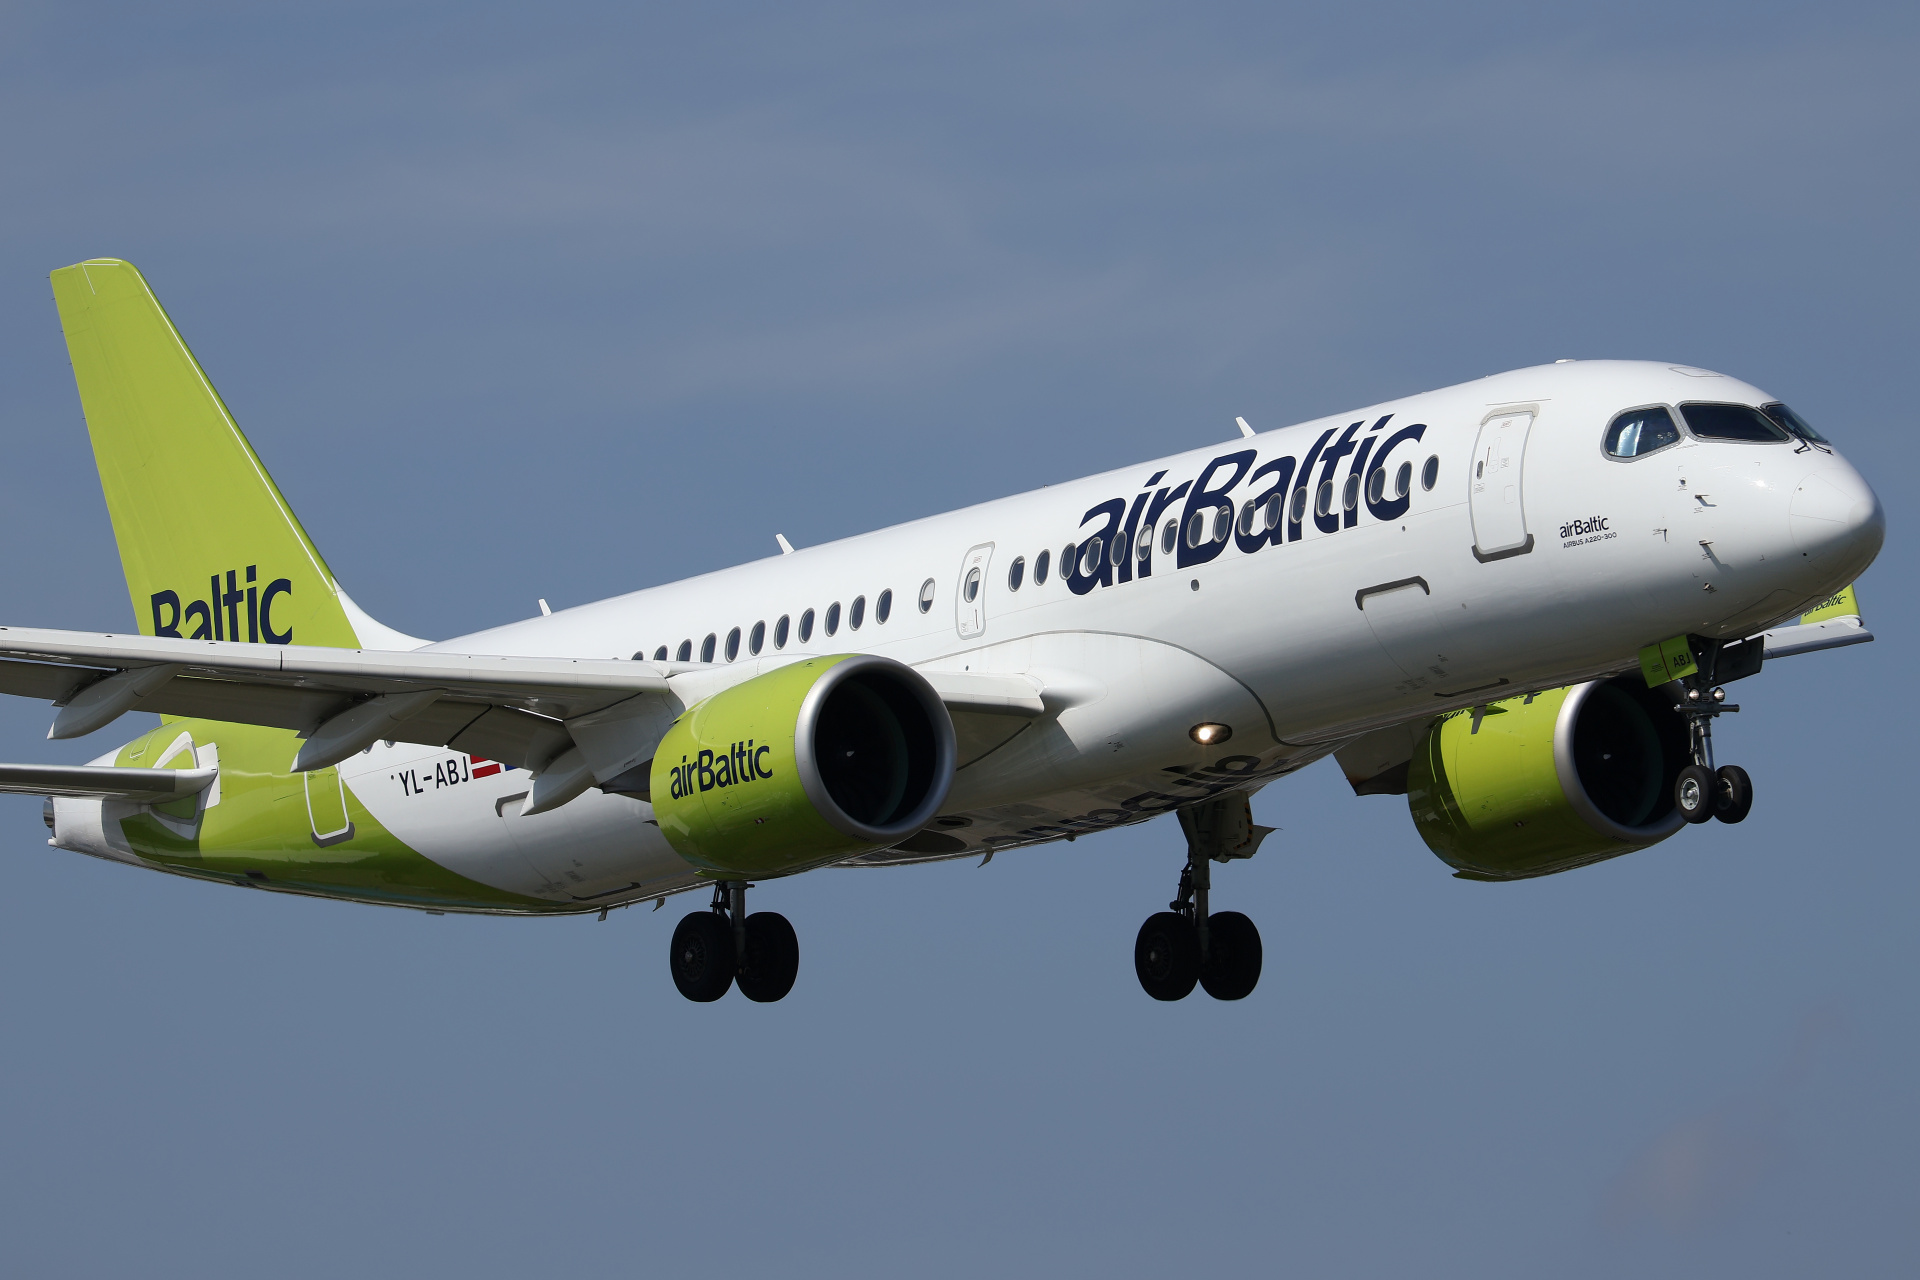 YL-ABJ (Aircraft » EPWA Spotting » Airbus A220-300 » airBaltic)